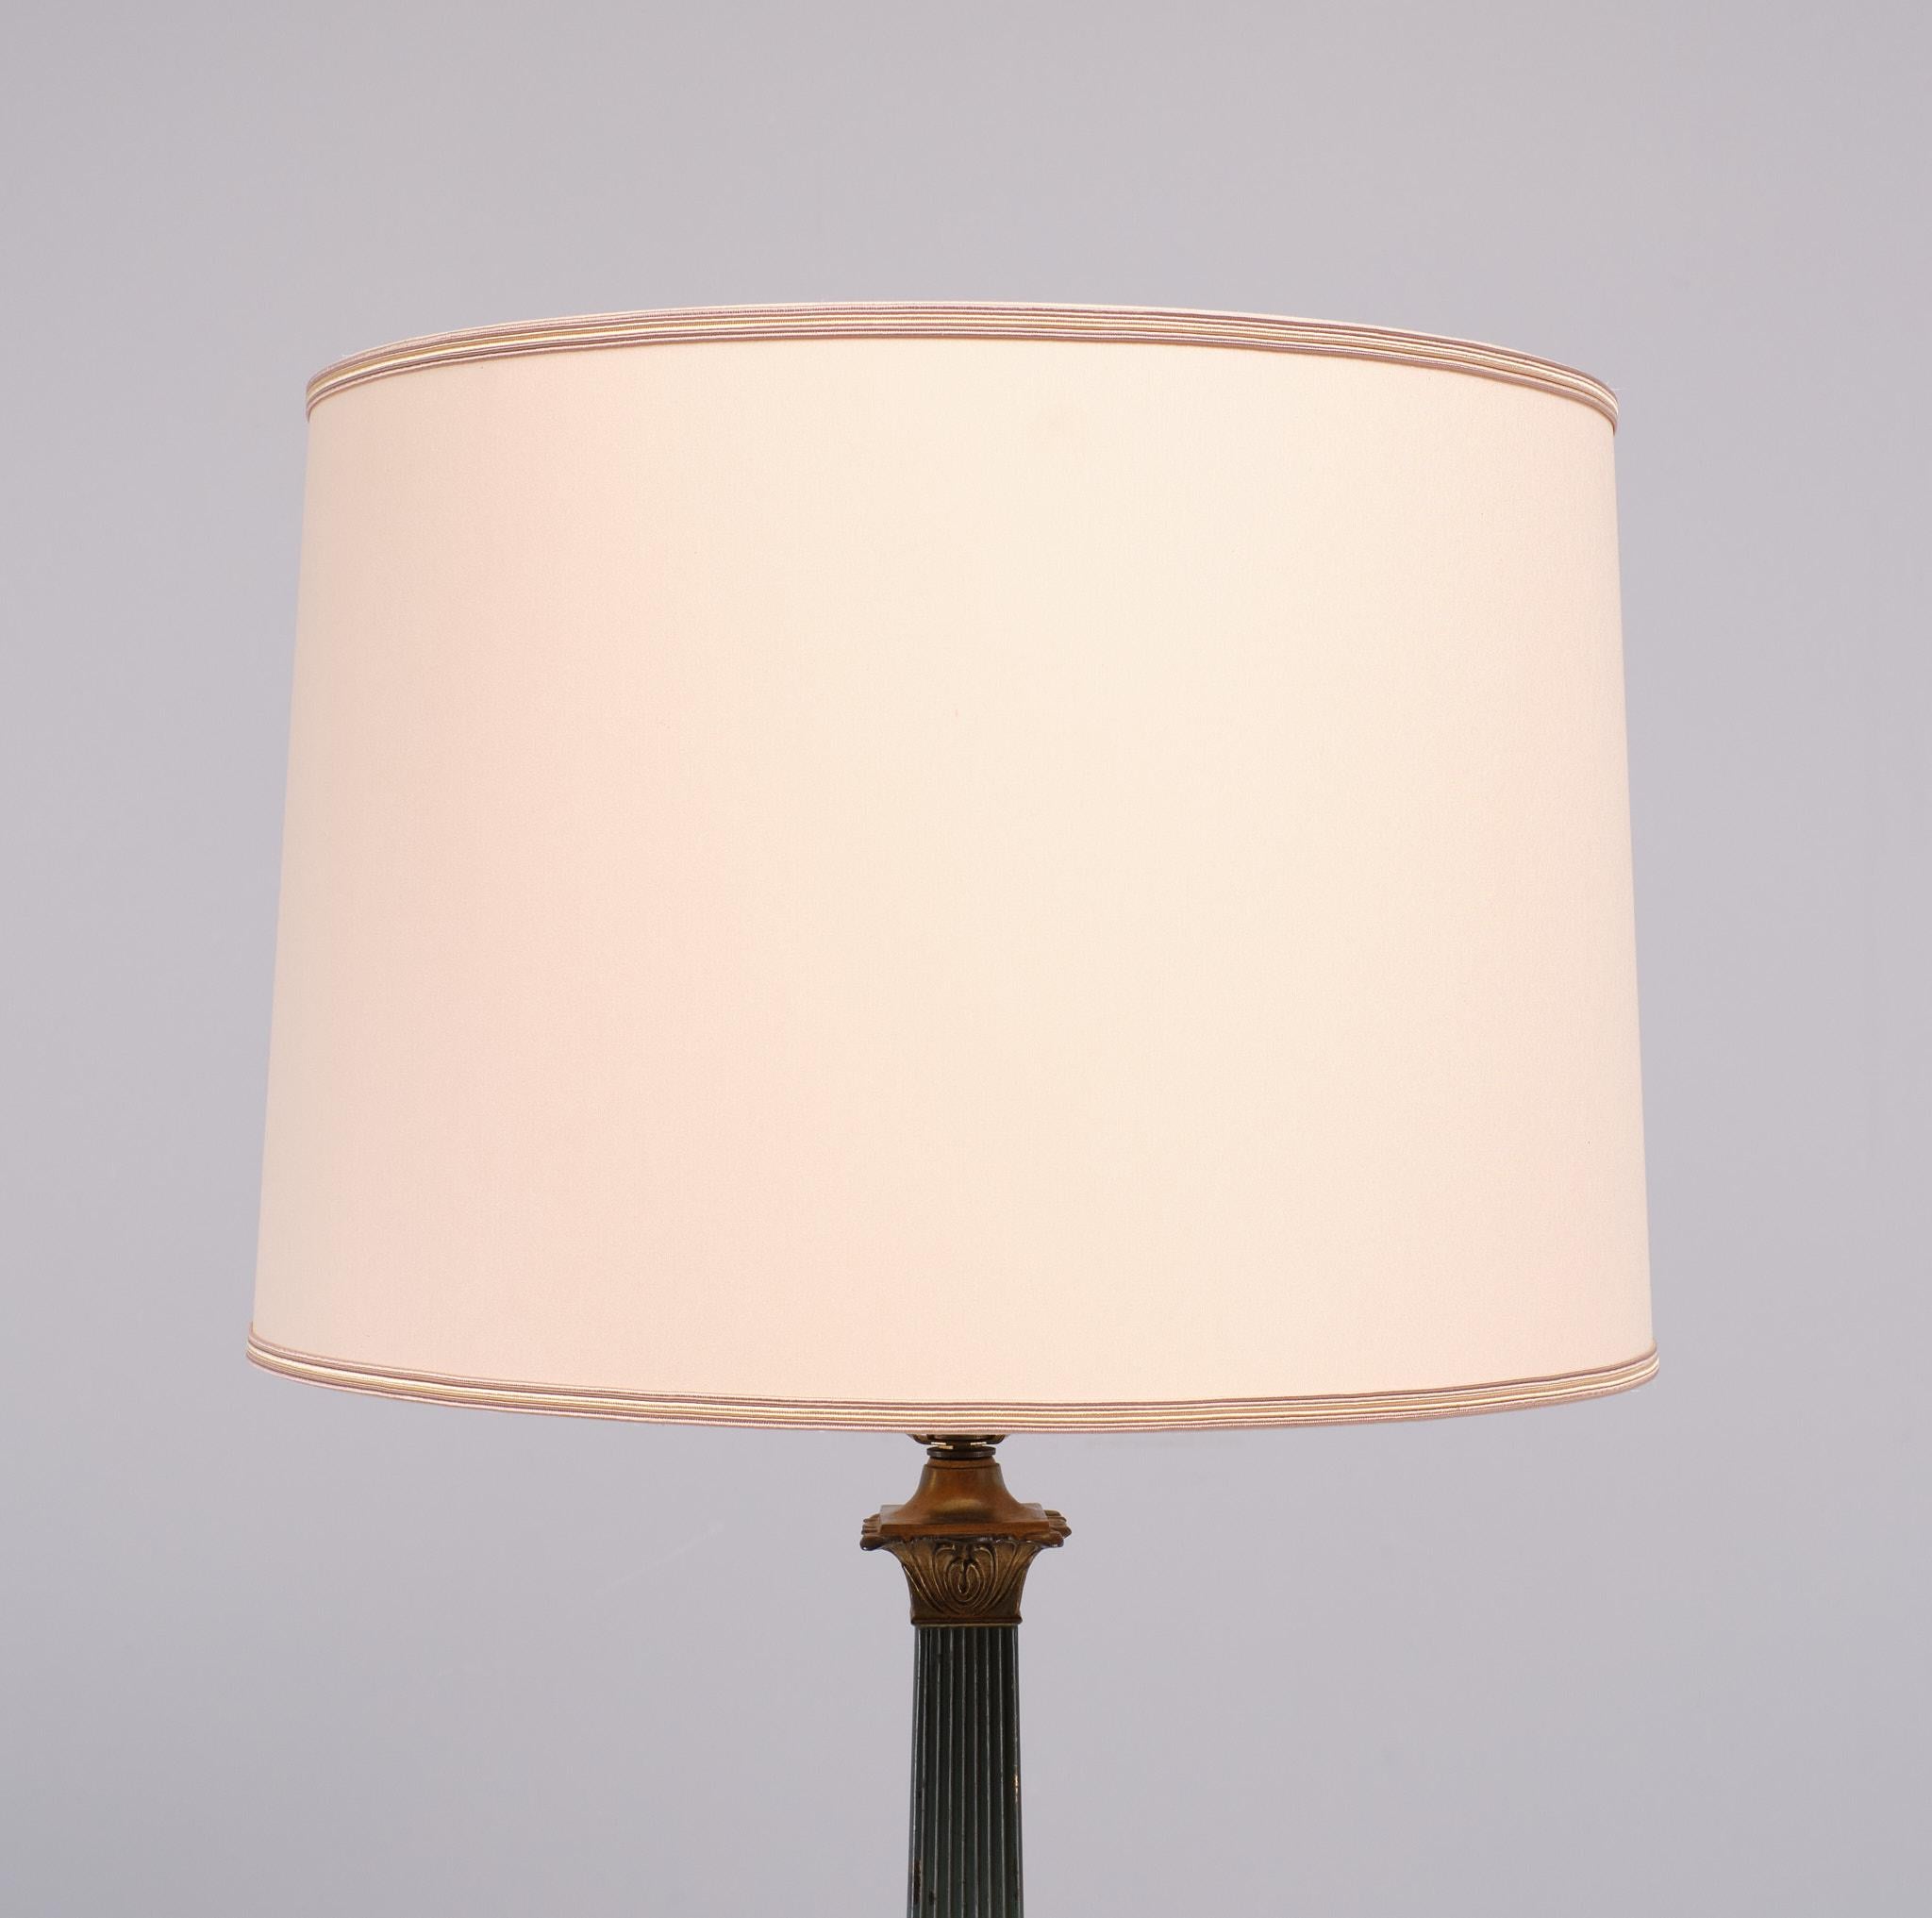 Large Empire Revival Table Lamp  1960s England  In Good Condition For Sale In Den Haag, NL